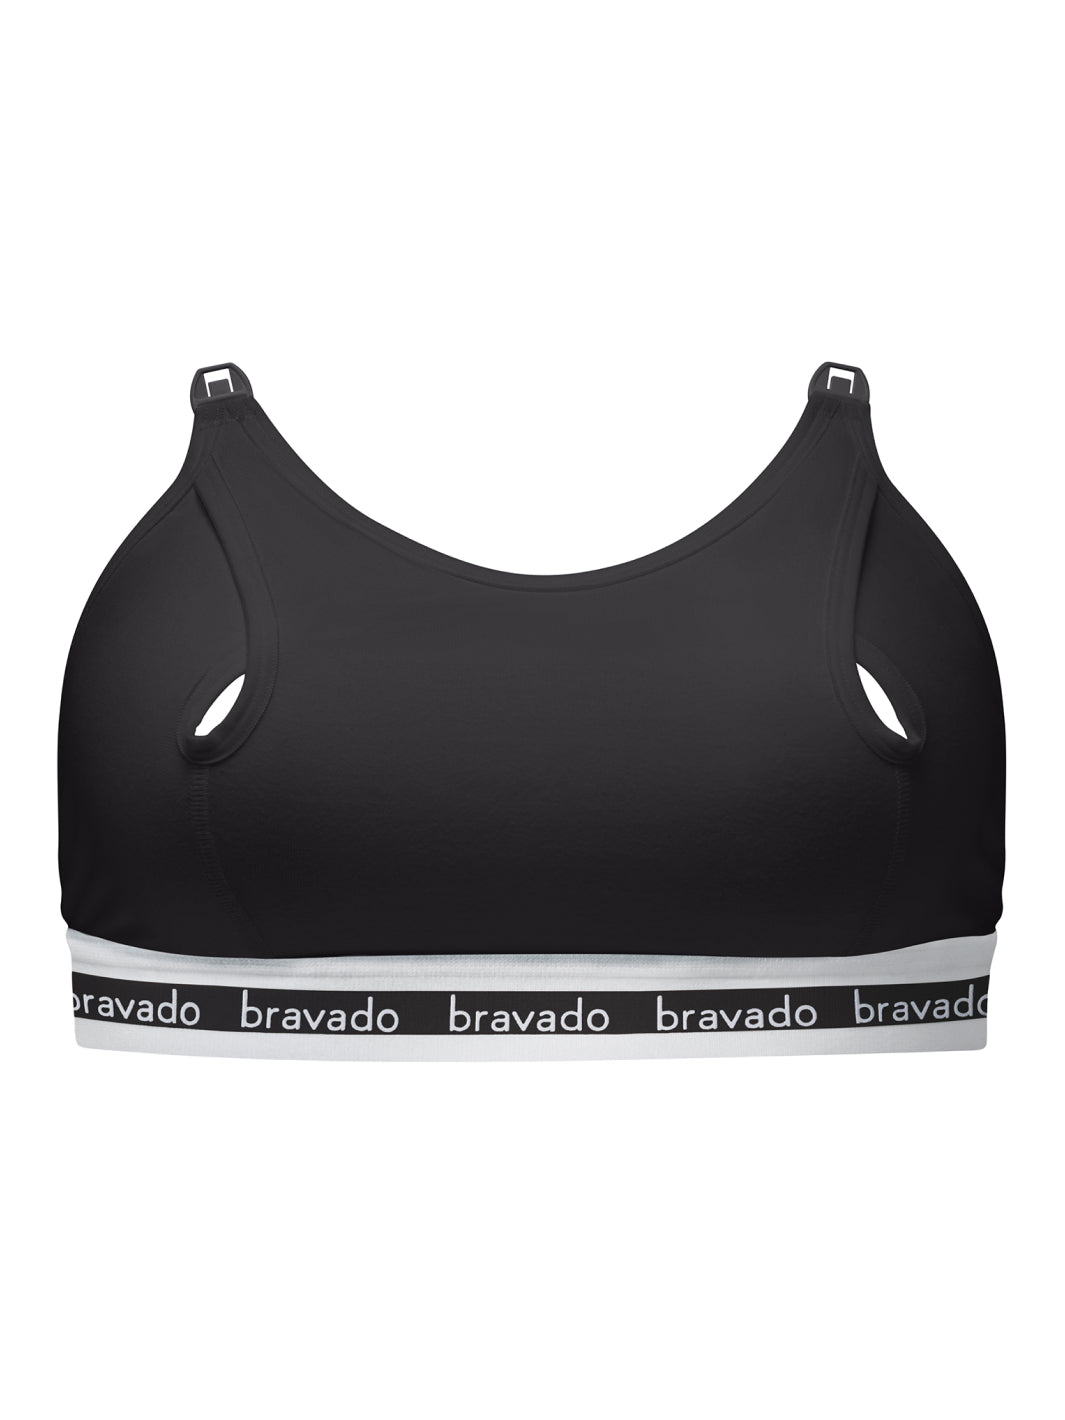 BRAVADO! DESIGNS Sustainable Clip and Pump Hands-Free Pumping Accessory, Black